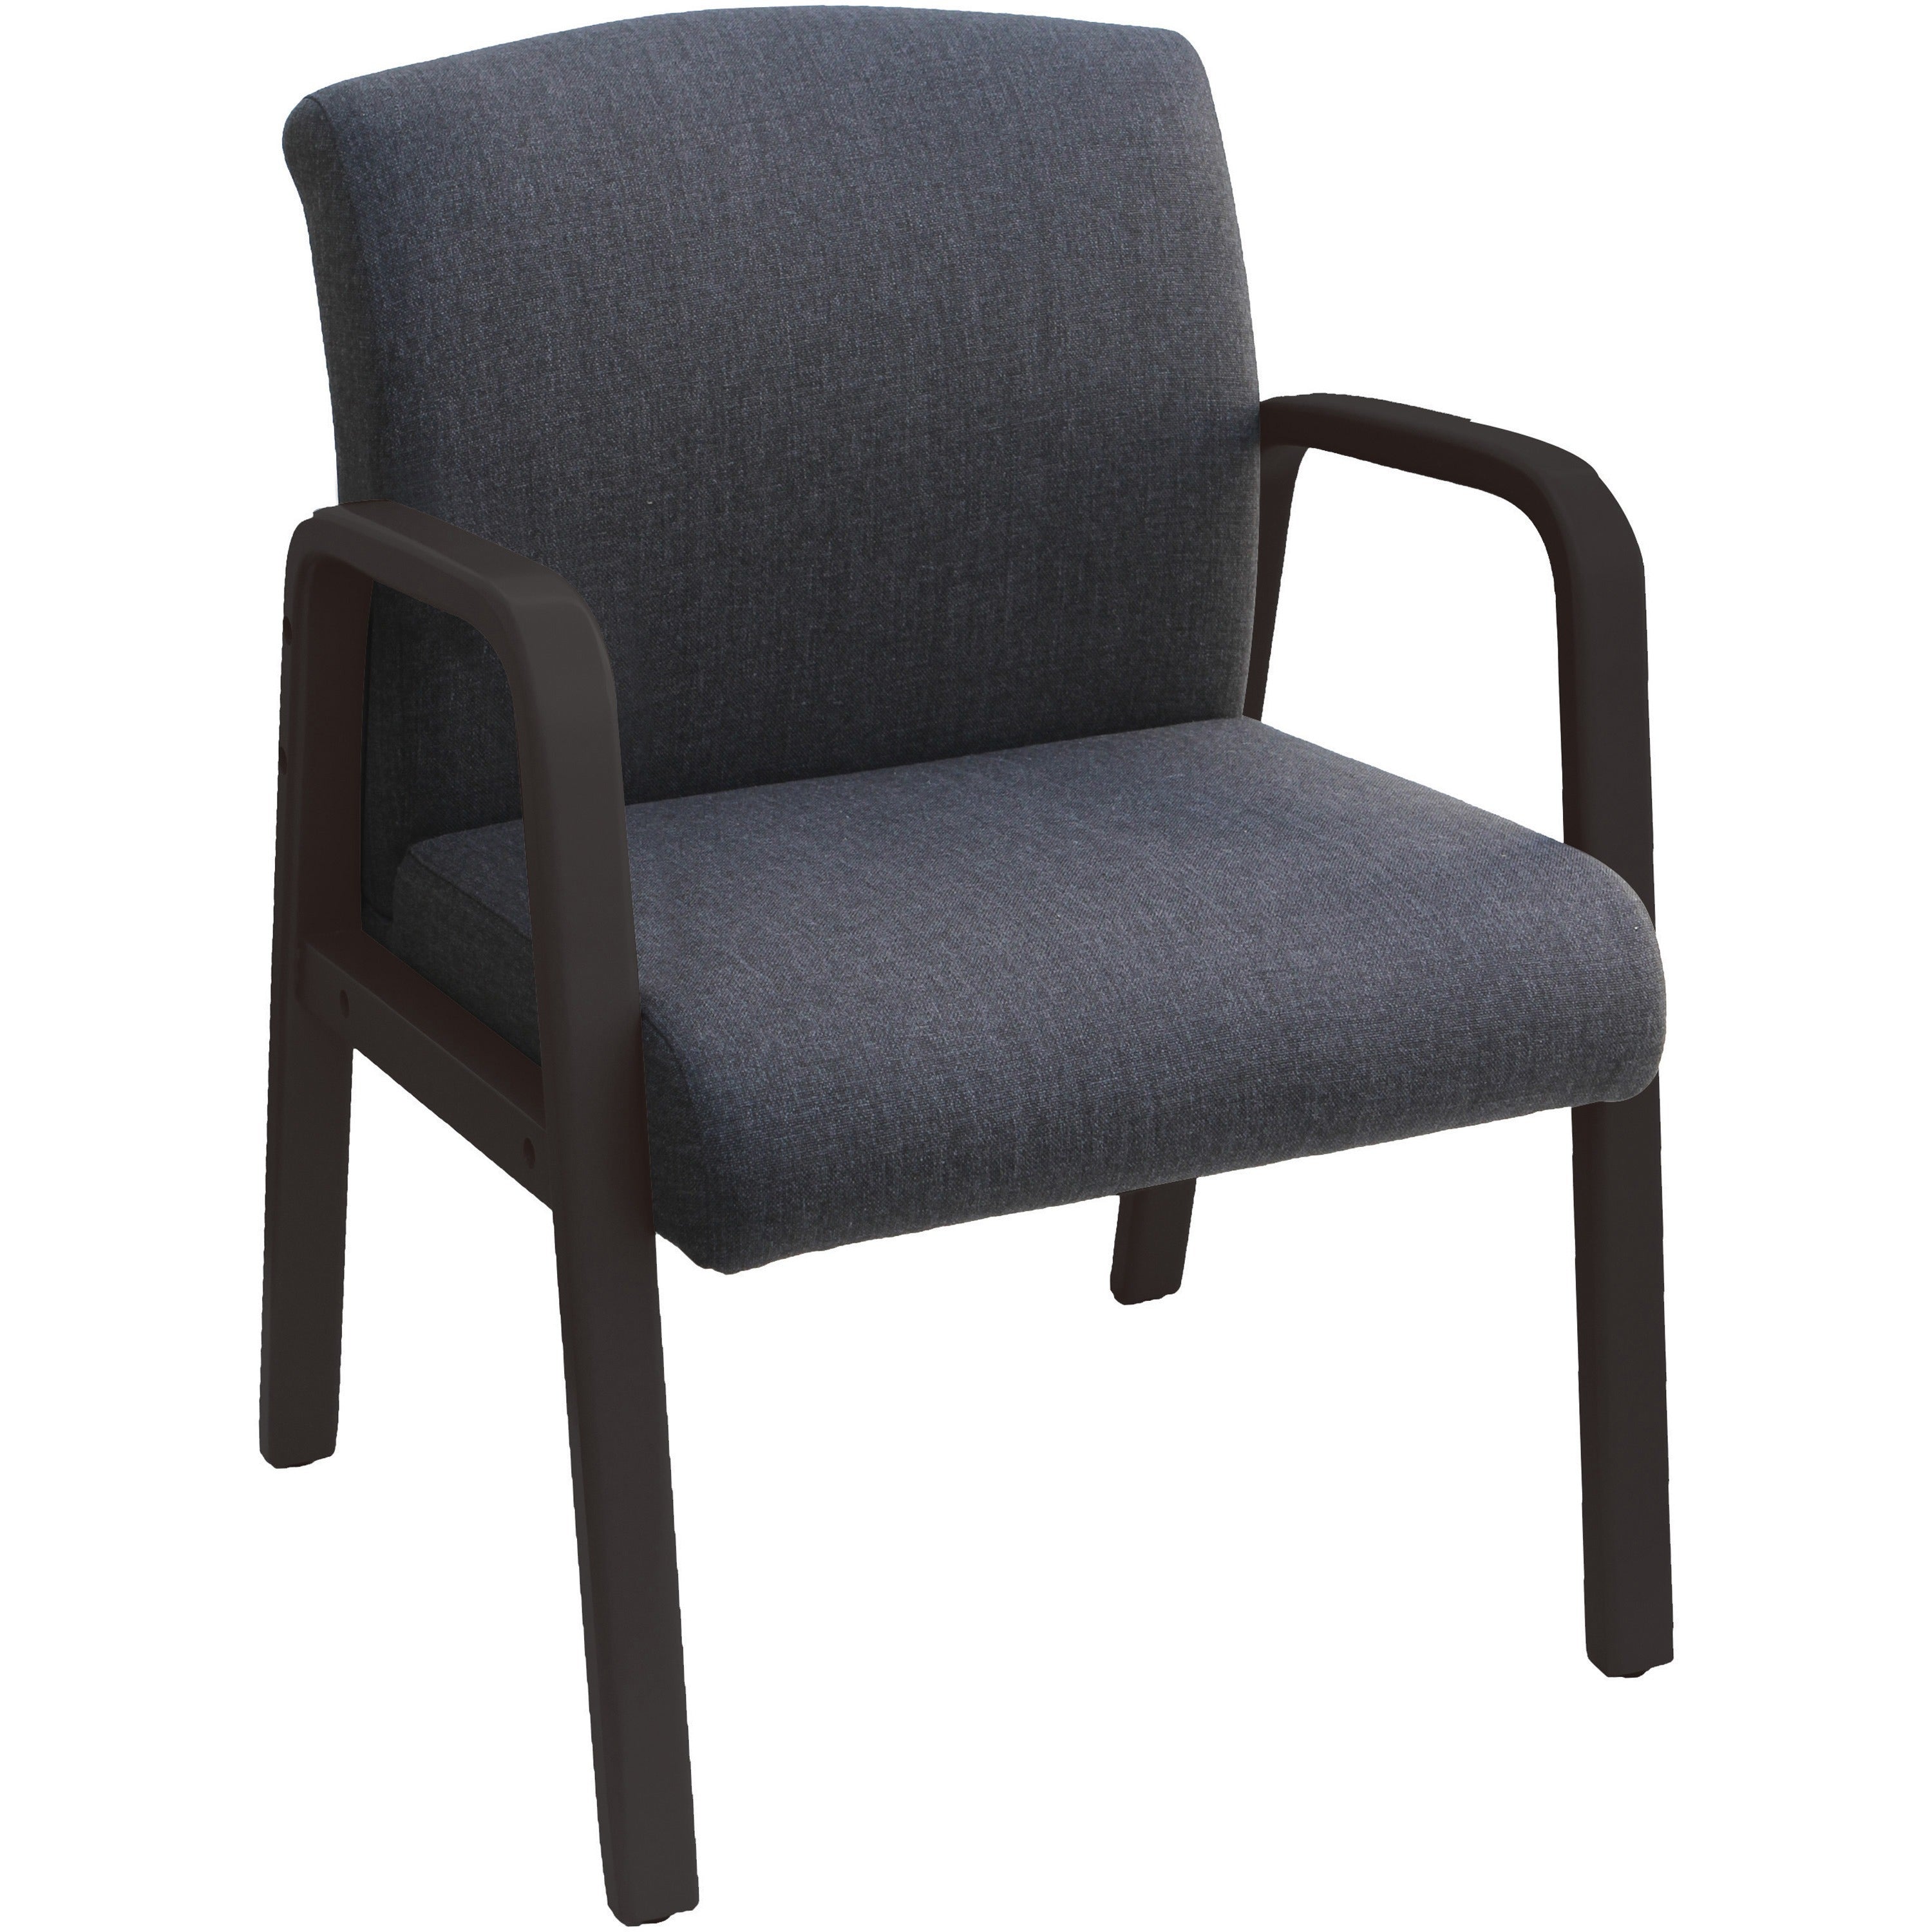 lorell-flannel-upholstered-guest-chair-gray-black-fabric-seat-wood-frame-mid-back-four-legged-base-gray-black-armrest-1-each_llr68559 - 1